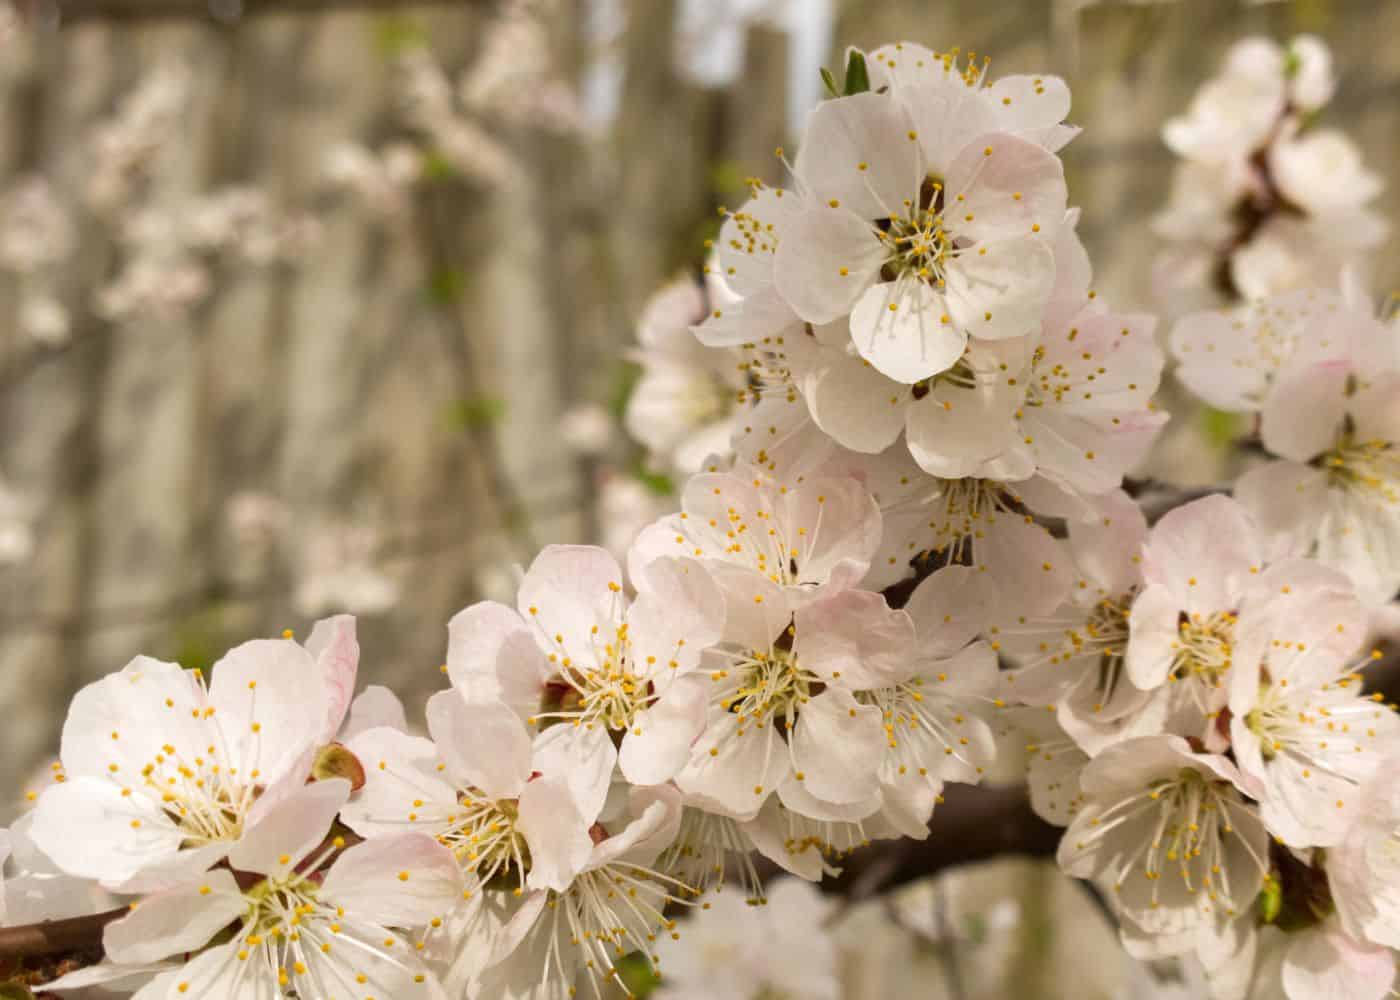 Apricot blossoms in spring